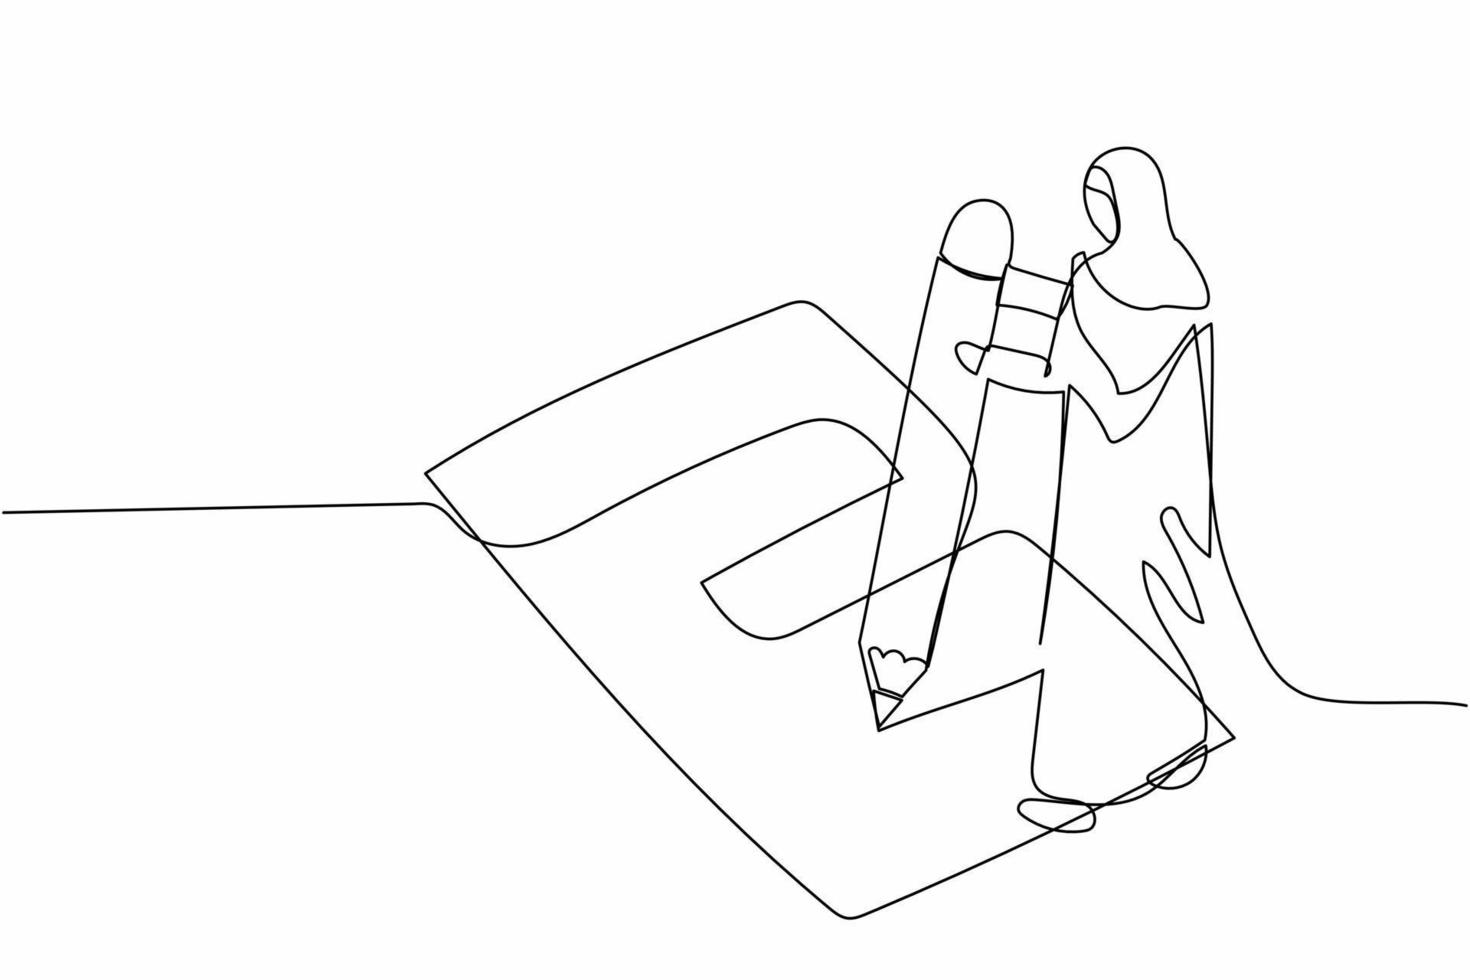 Single continuous line drawing Arab businesswoman writing survey form on the floor. Female manager filled out checklist on clipboard with giant pencil. One line draw graphic design vector illustration